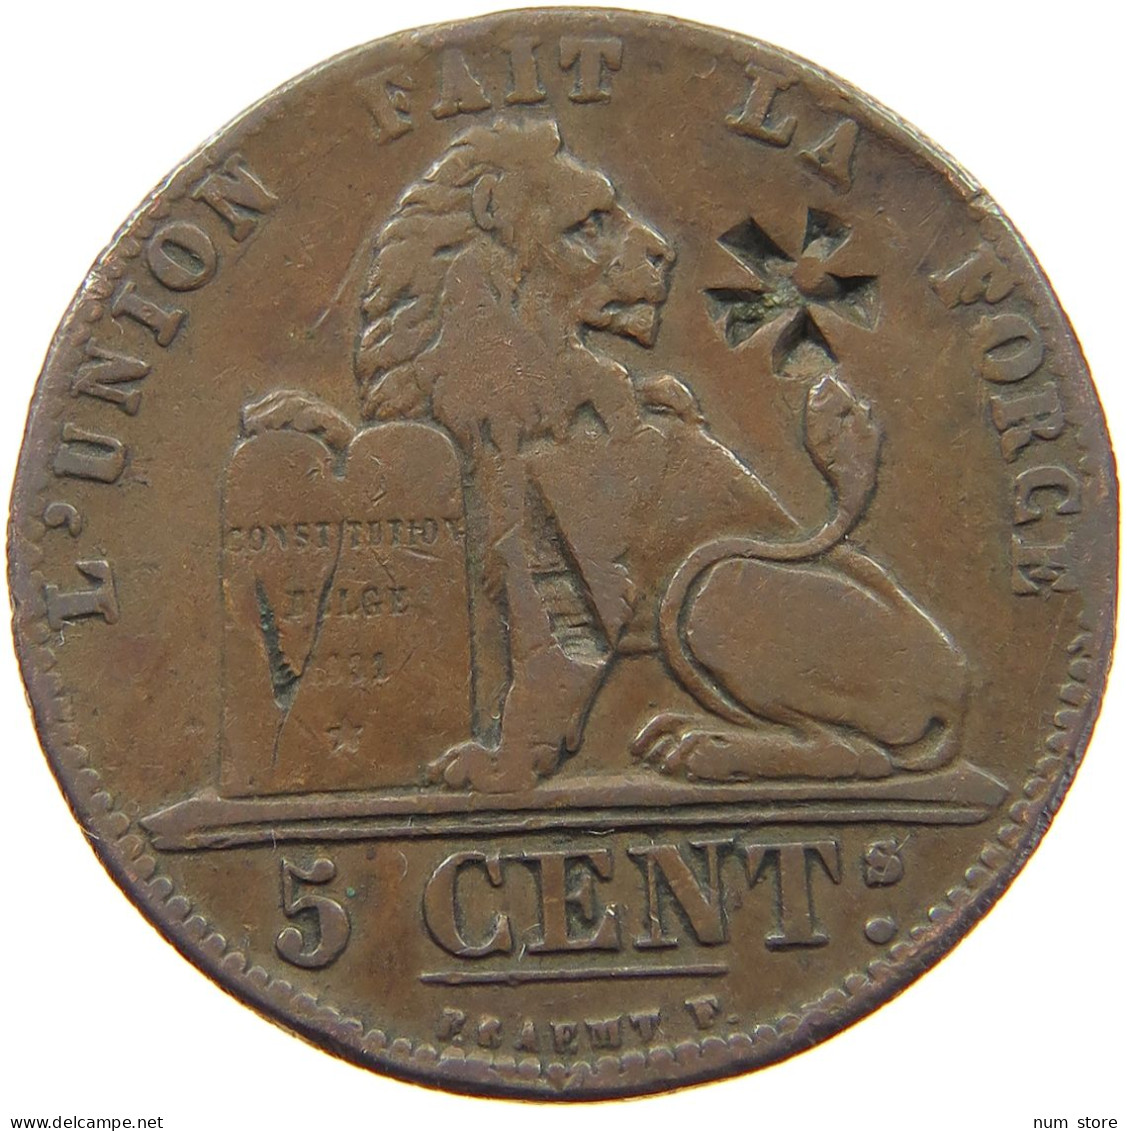 BELGIUM 5 CENTIMES 1847 5 CENTIMES 1847 COUNTERMARKED #t132 0585 - 5 Cent